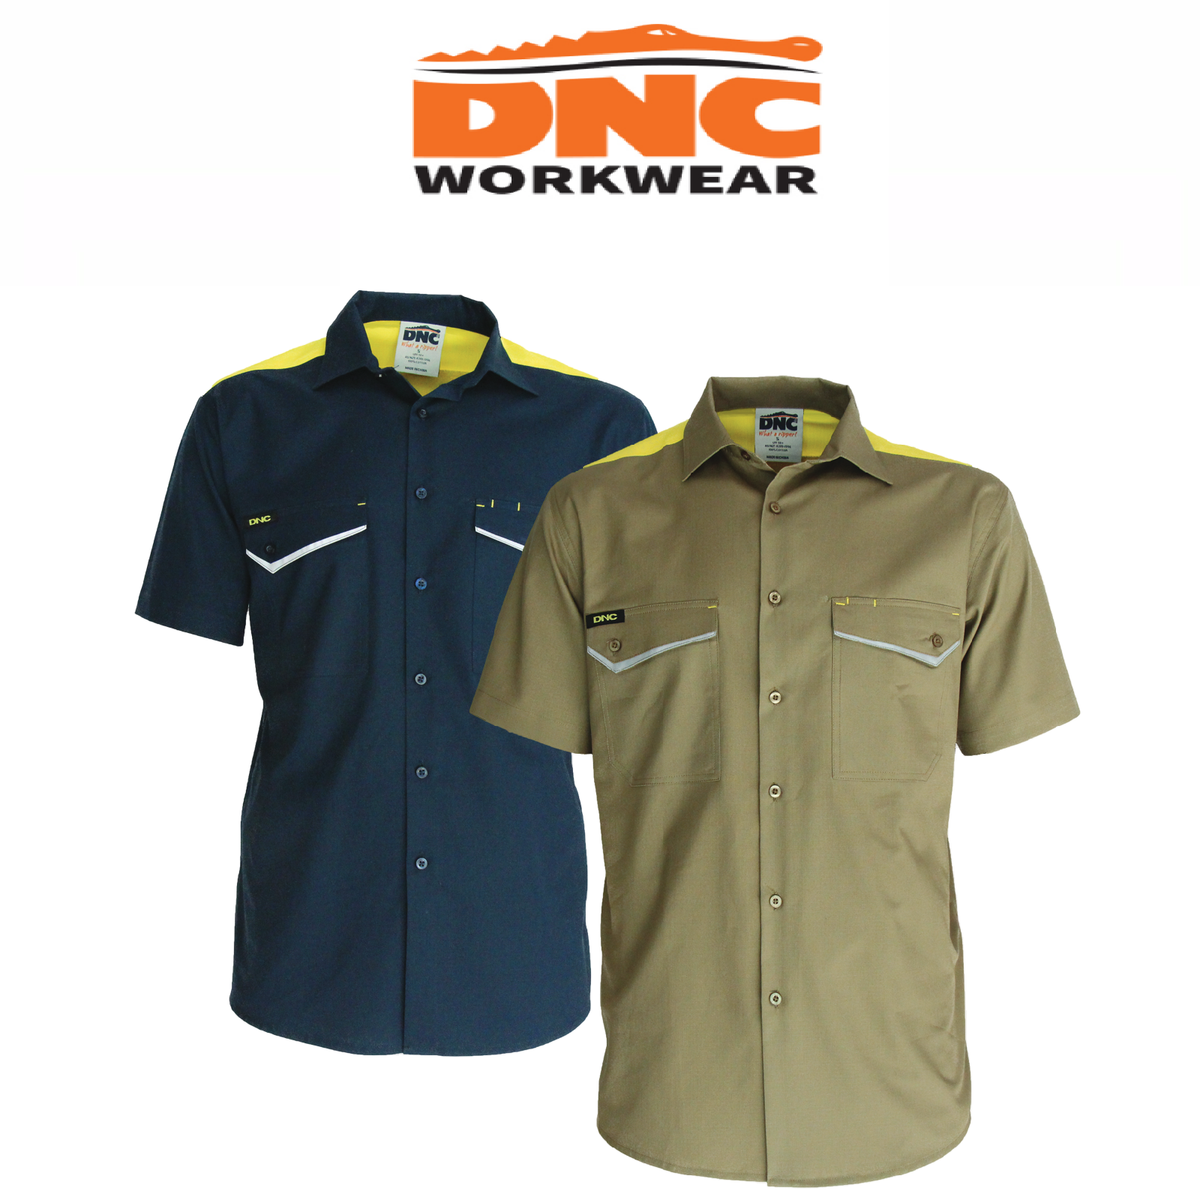 DNC Mens RipStop Cool Cotton Tradies Shirt, S/S Lightweight Breathable 3581